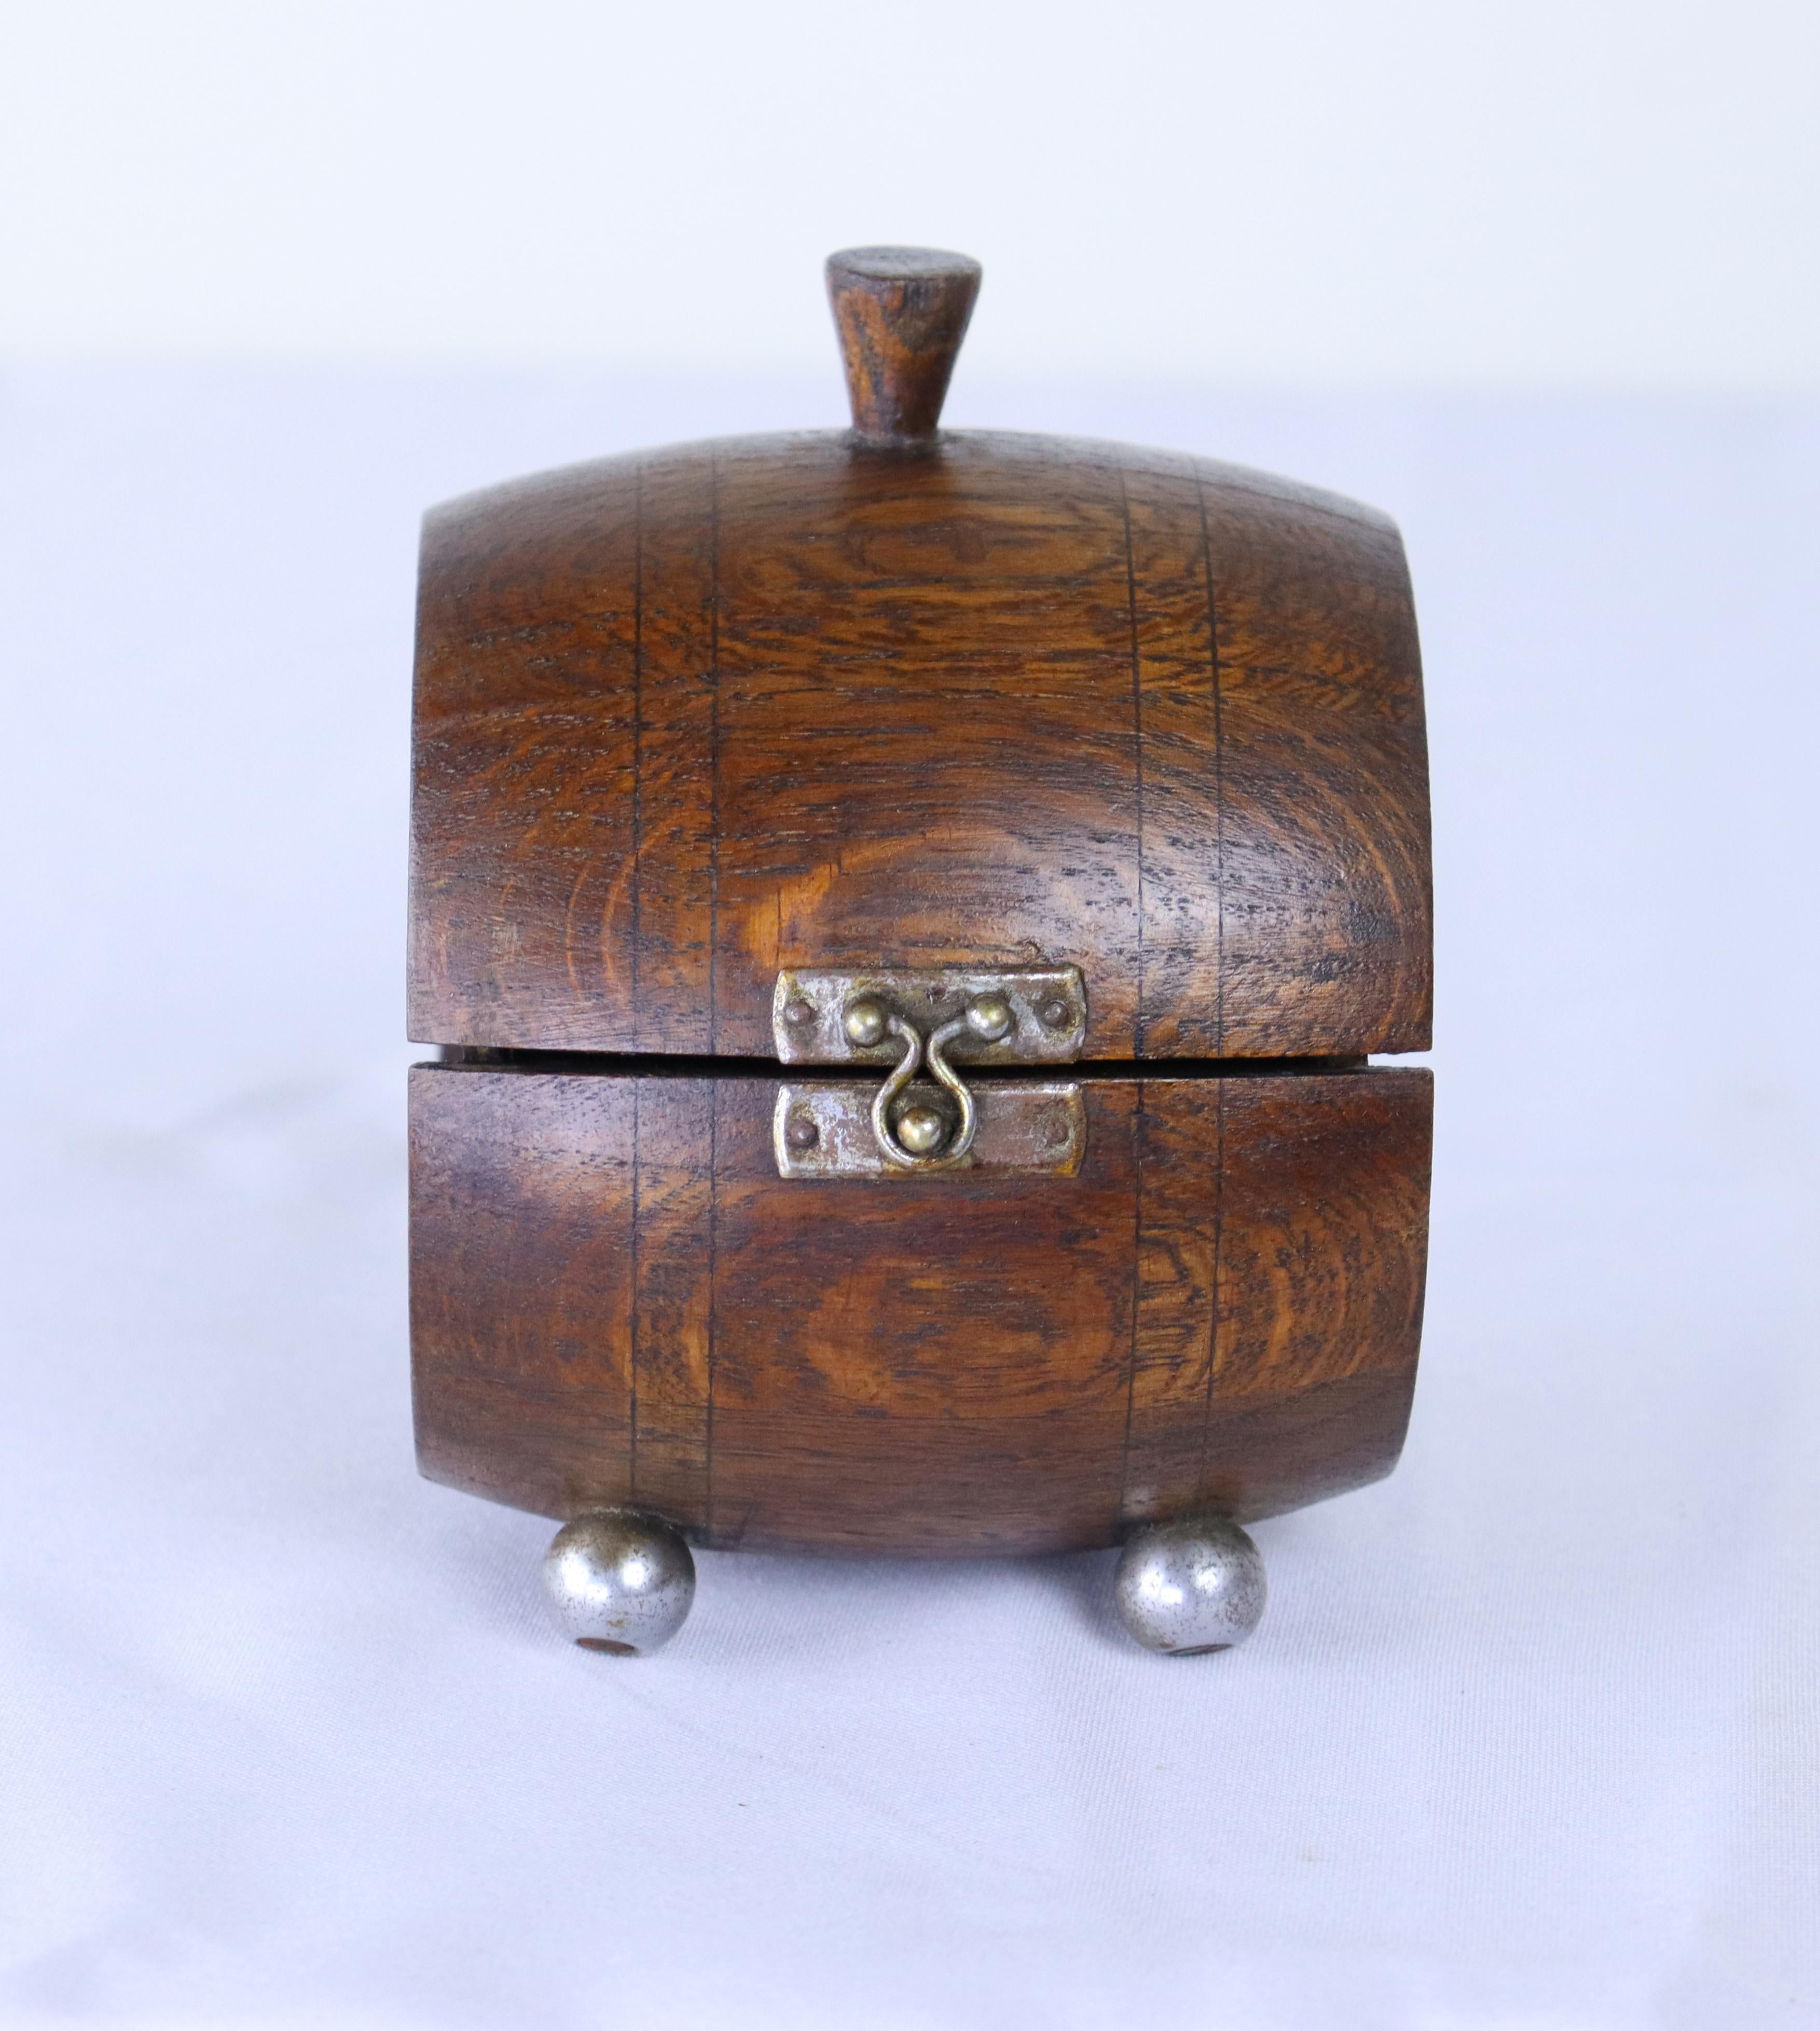 A sweet tea caddy or box, shapped like a cask.  Small bun feet add to the look.  The top does not close completely due to age and shrinkage.  As shown.  Priced accordingly.